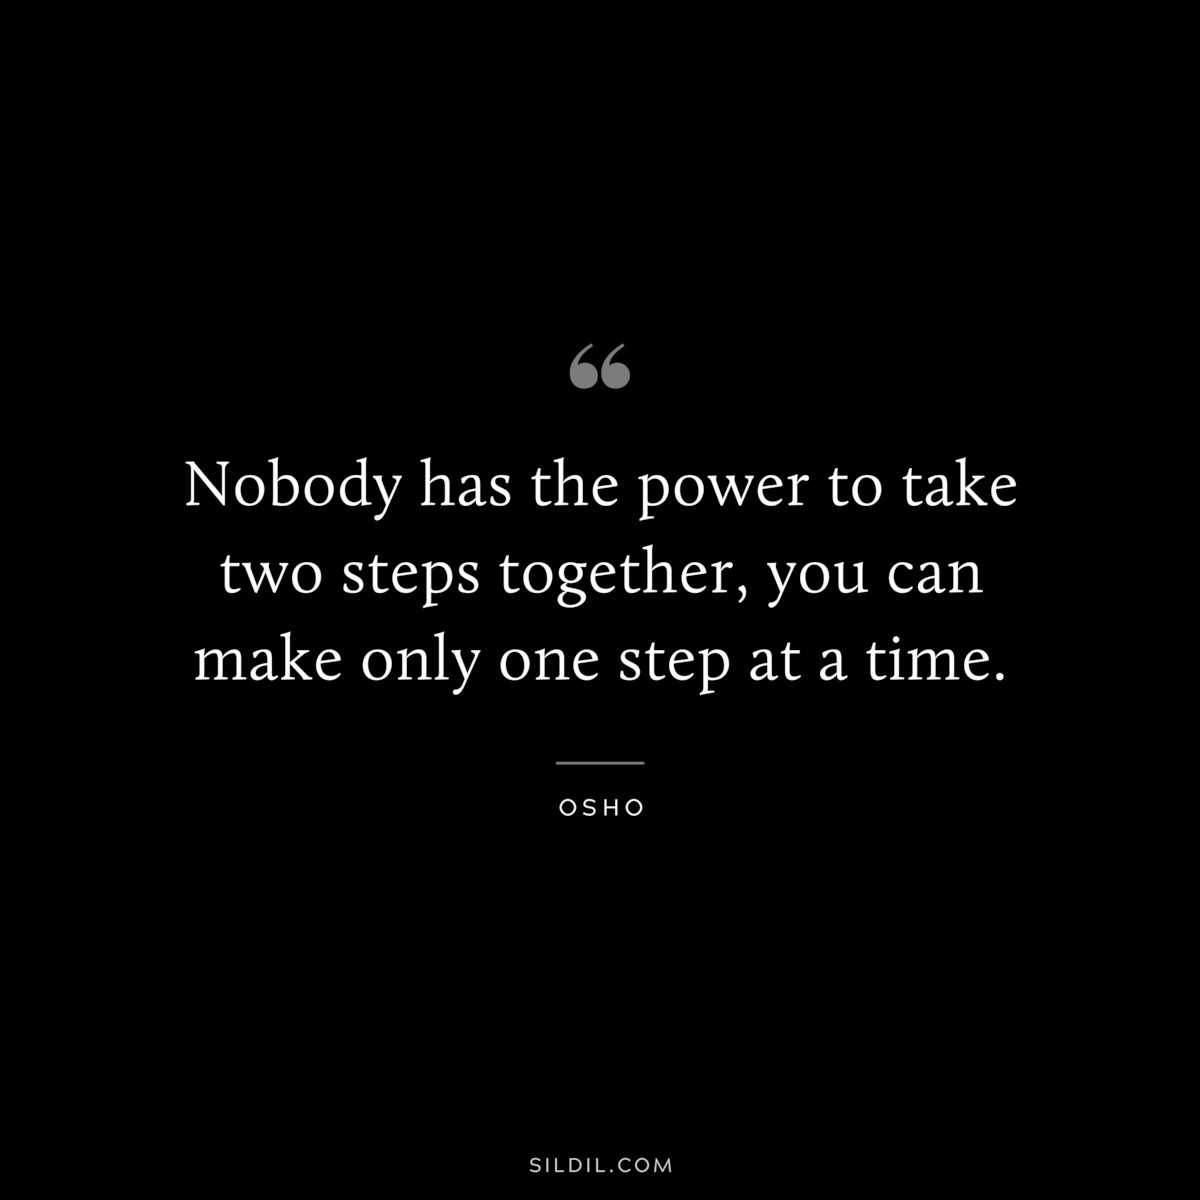 Nobody has the power to take two steps together, you can make only one step at a time. ― Osho